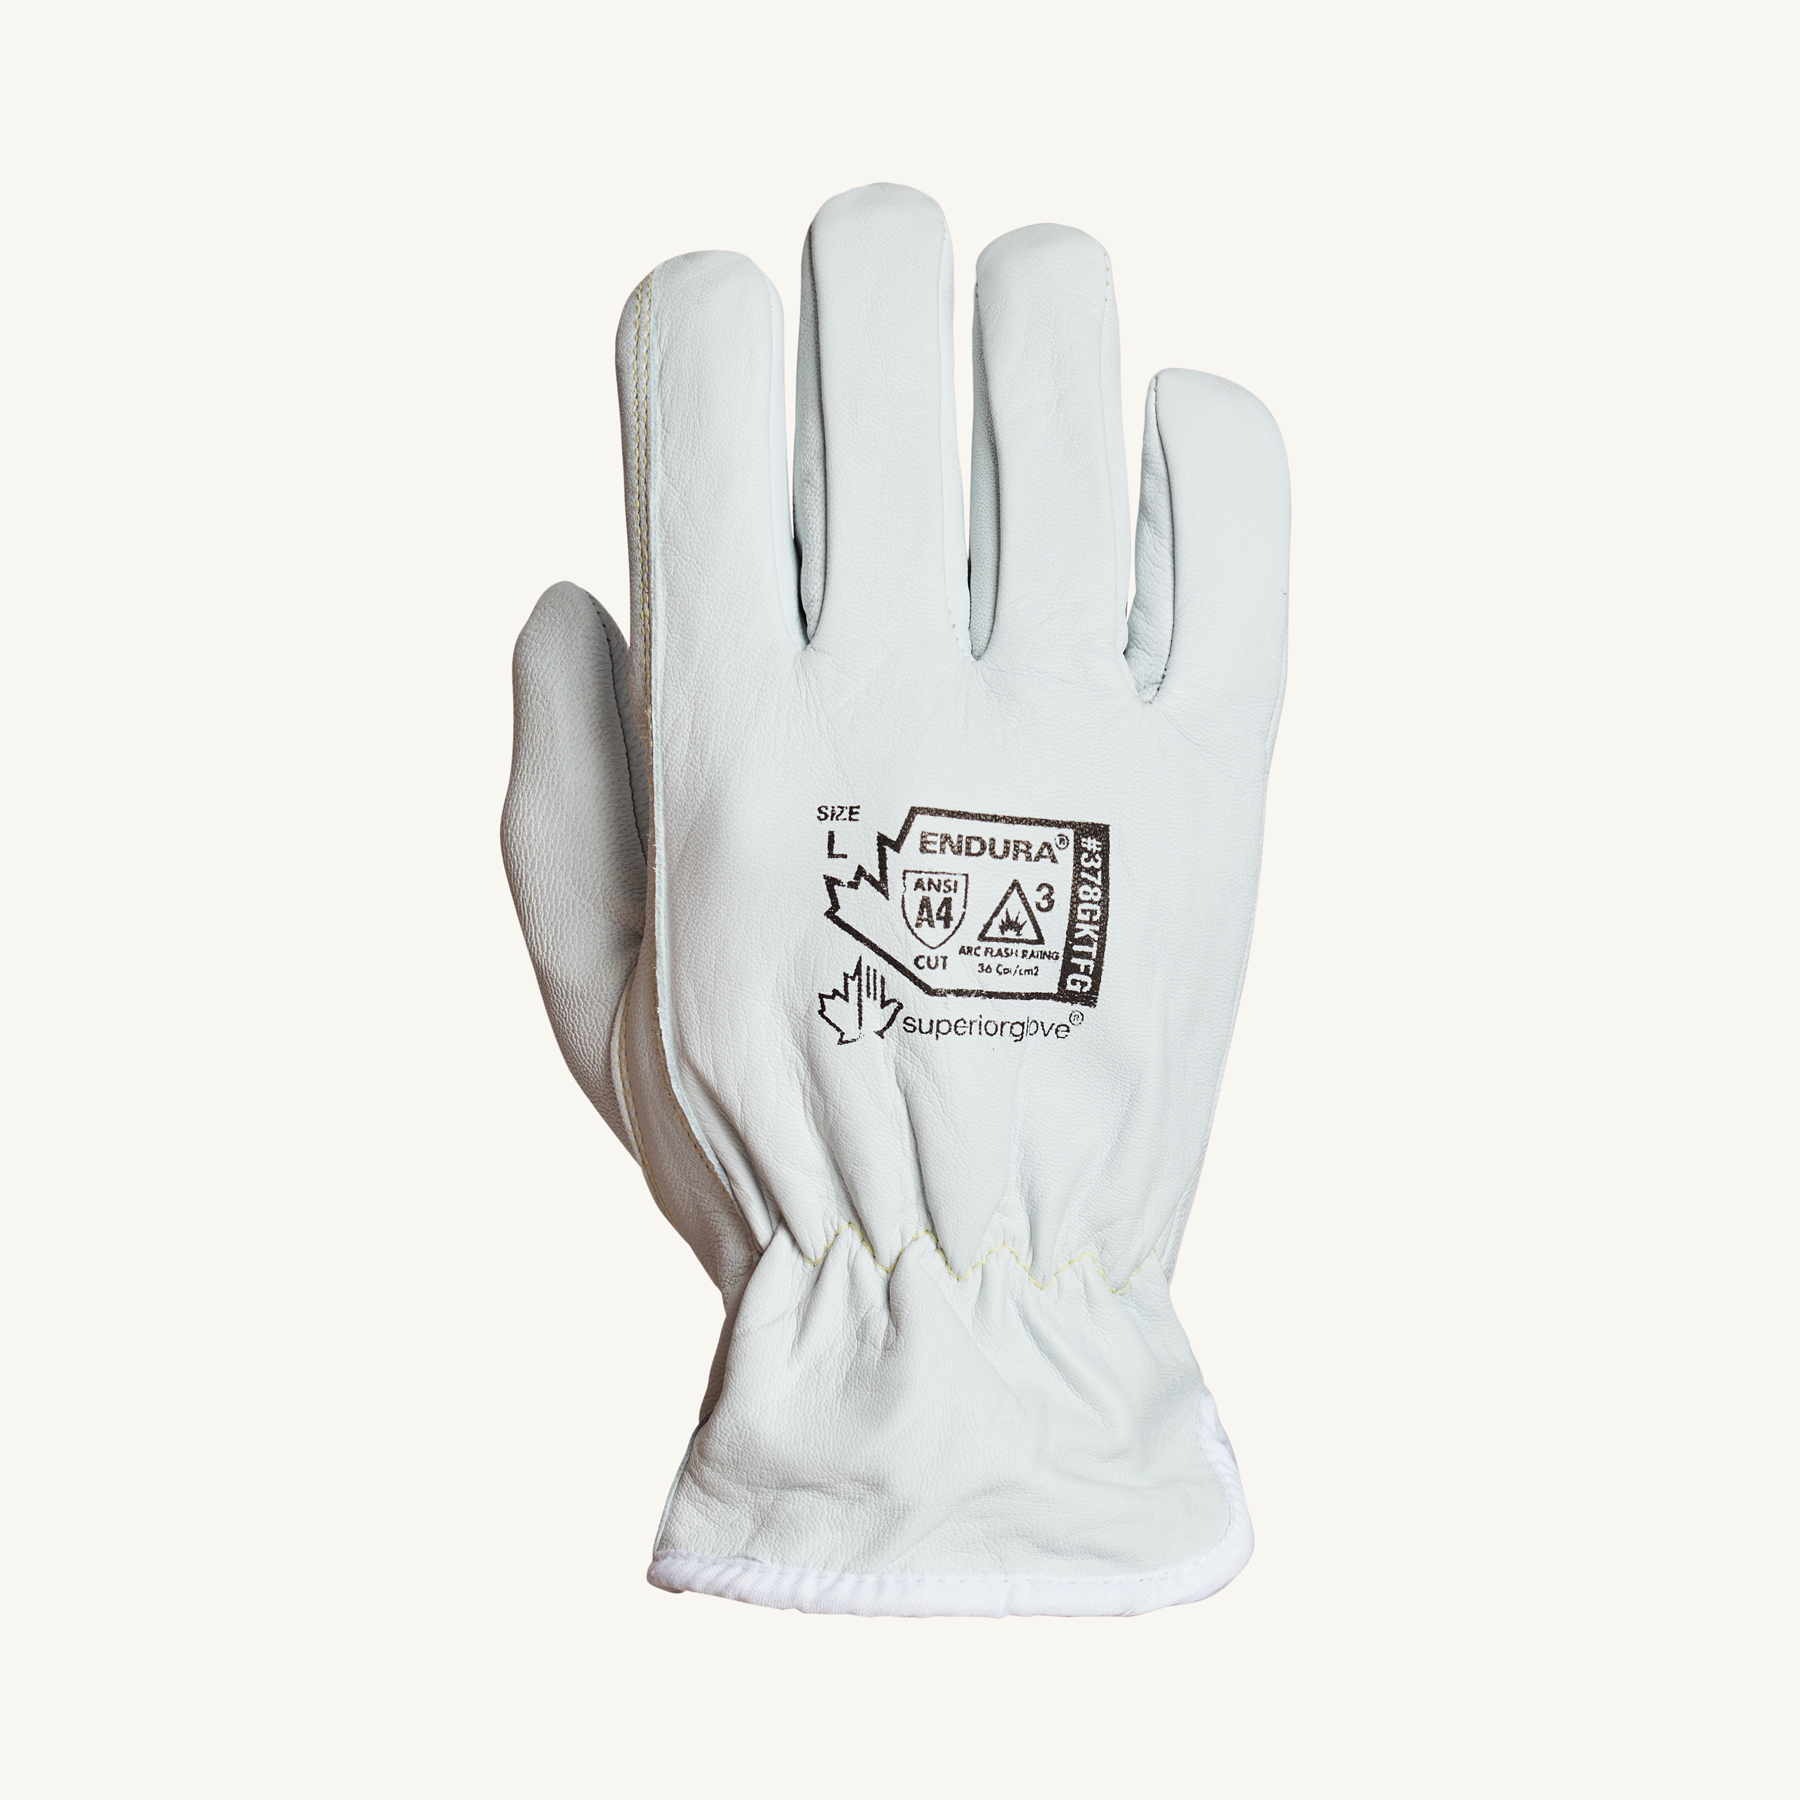 Endura® Arc Flash-rated goatskin gloves that protect against cuts, punctures and flames - Arc Flash